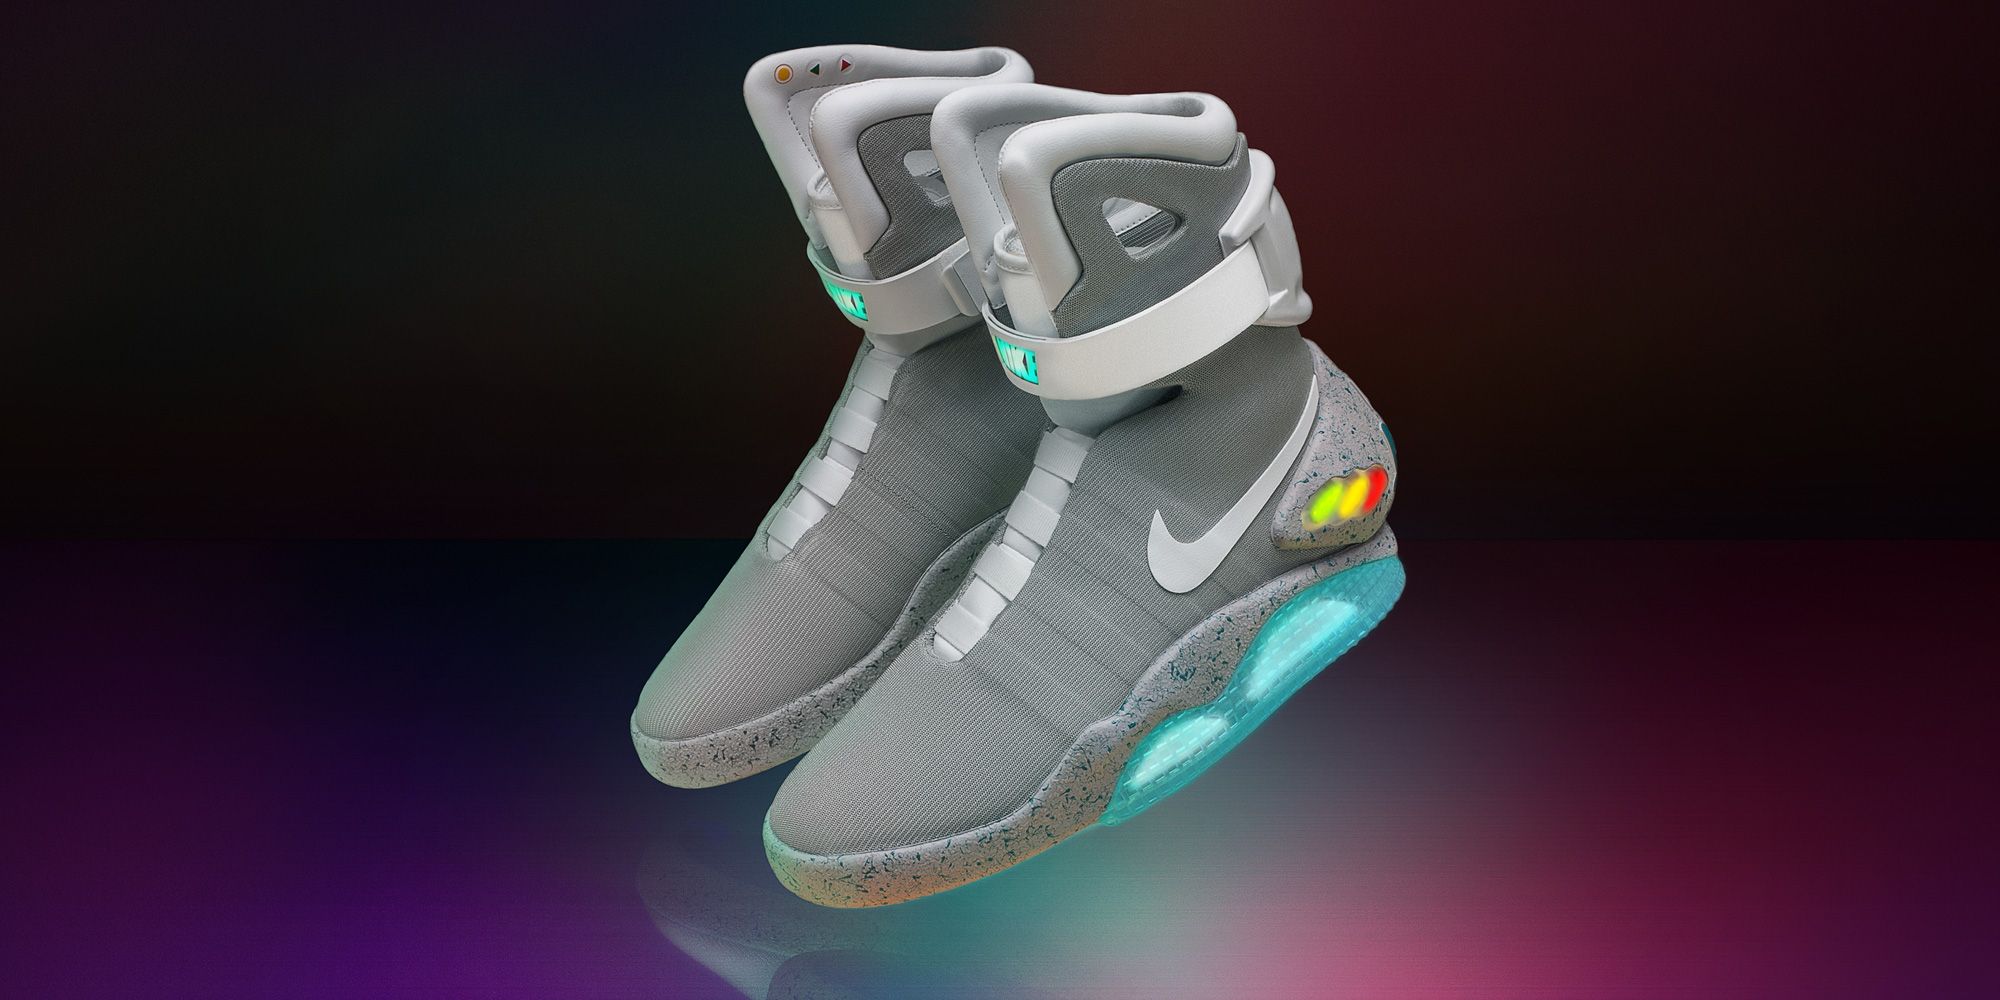 Percepción sencillo frío Nike Mag with Power Laces Online Drawing - How to Enter the Self-Lacing  'Back to the Future' Sneaker Auction